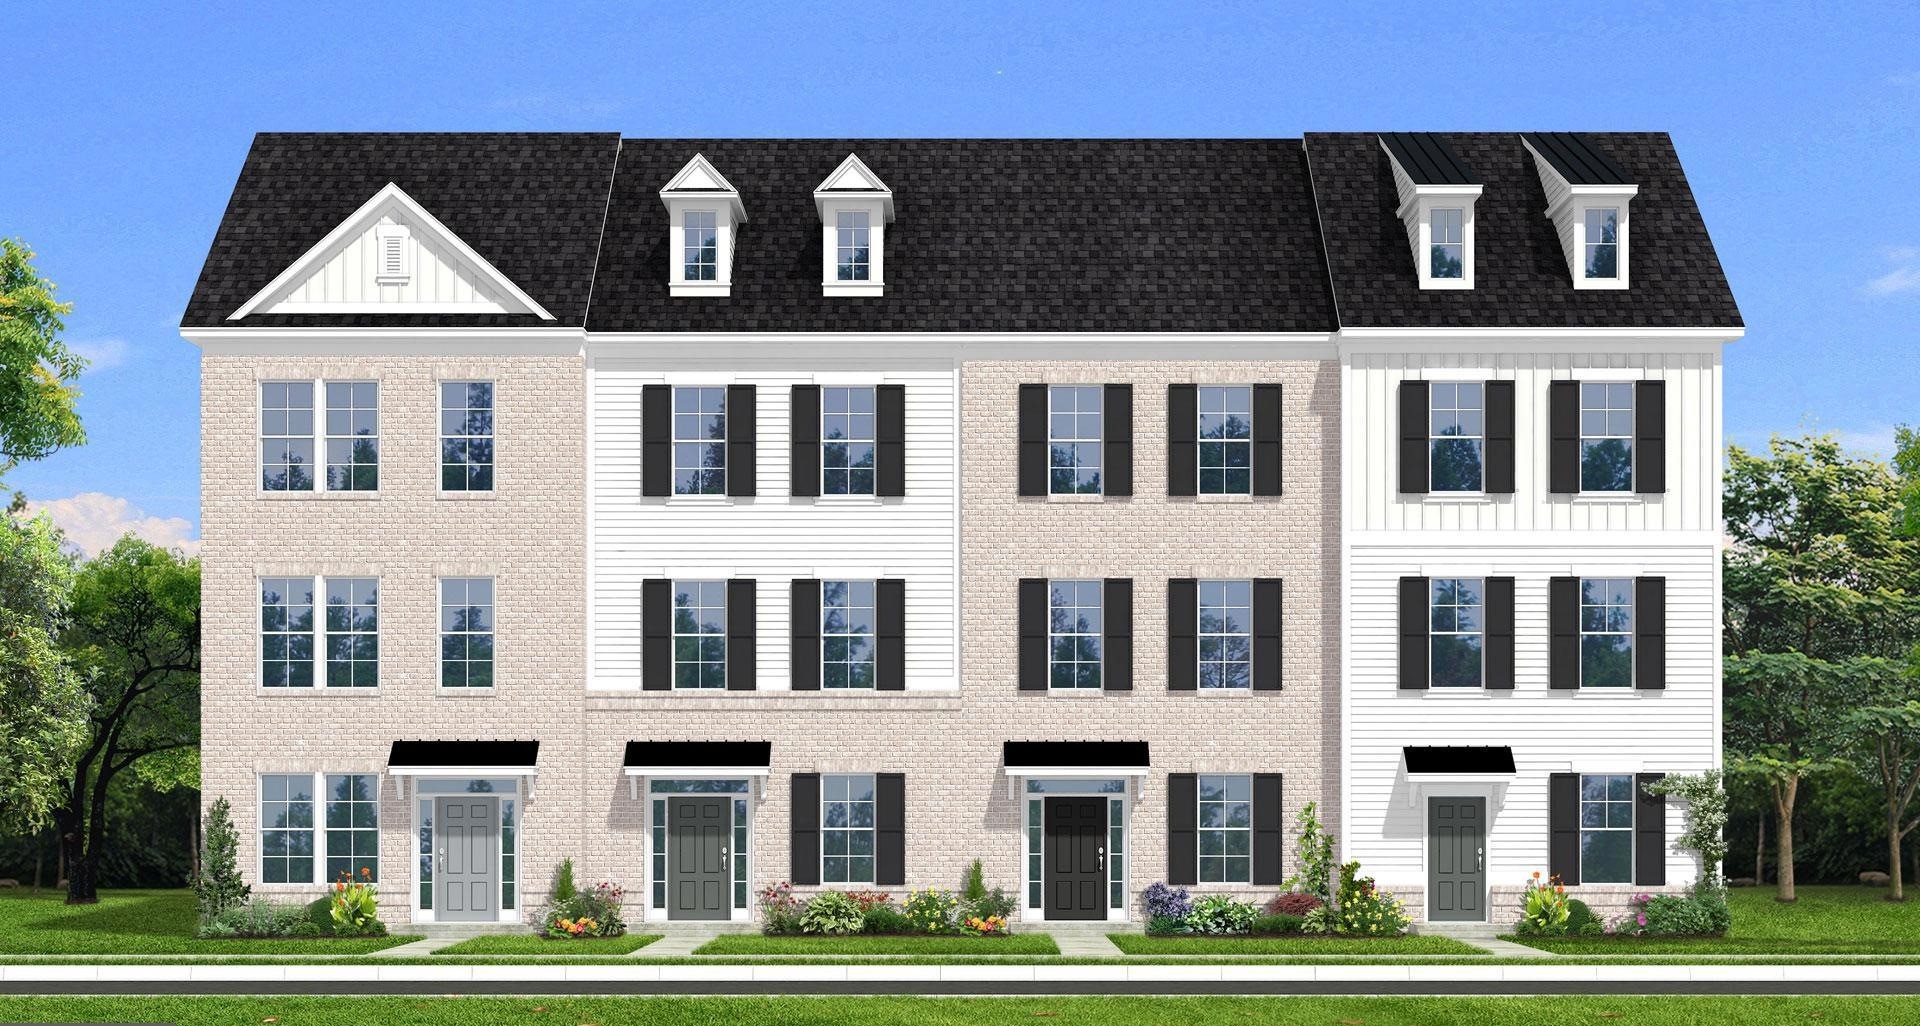 3d-exterior-design-rendering-town-homes-baltimore-maryland